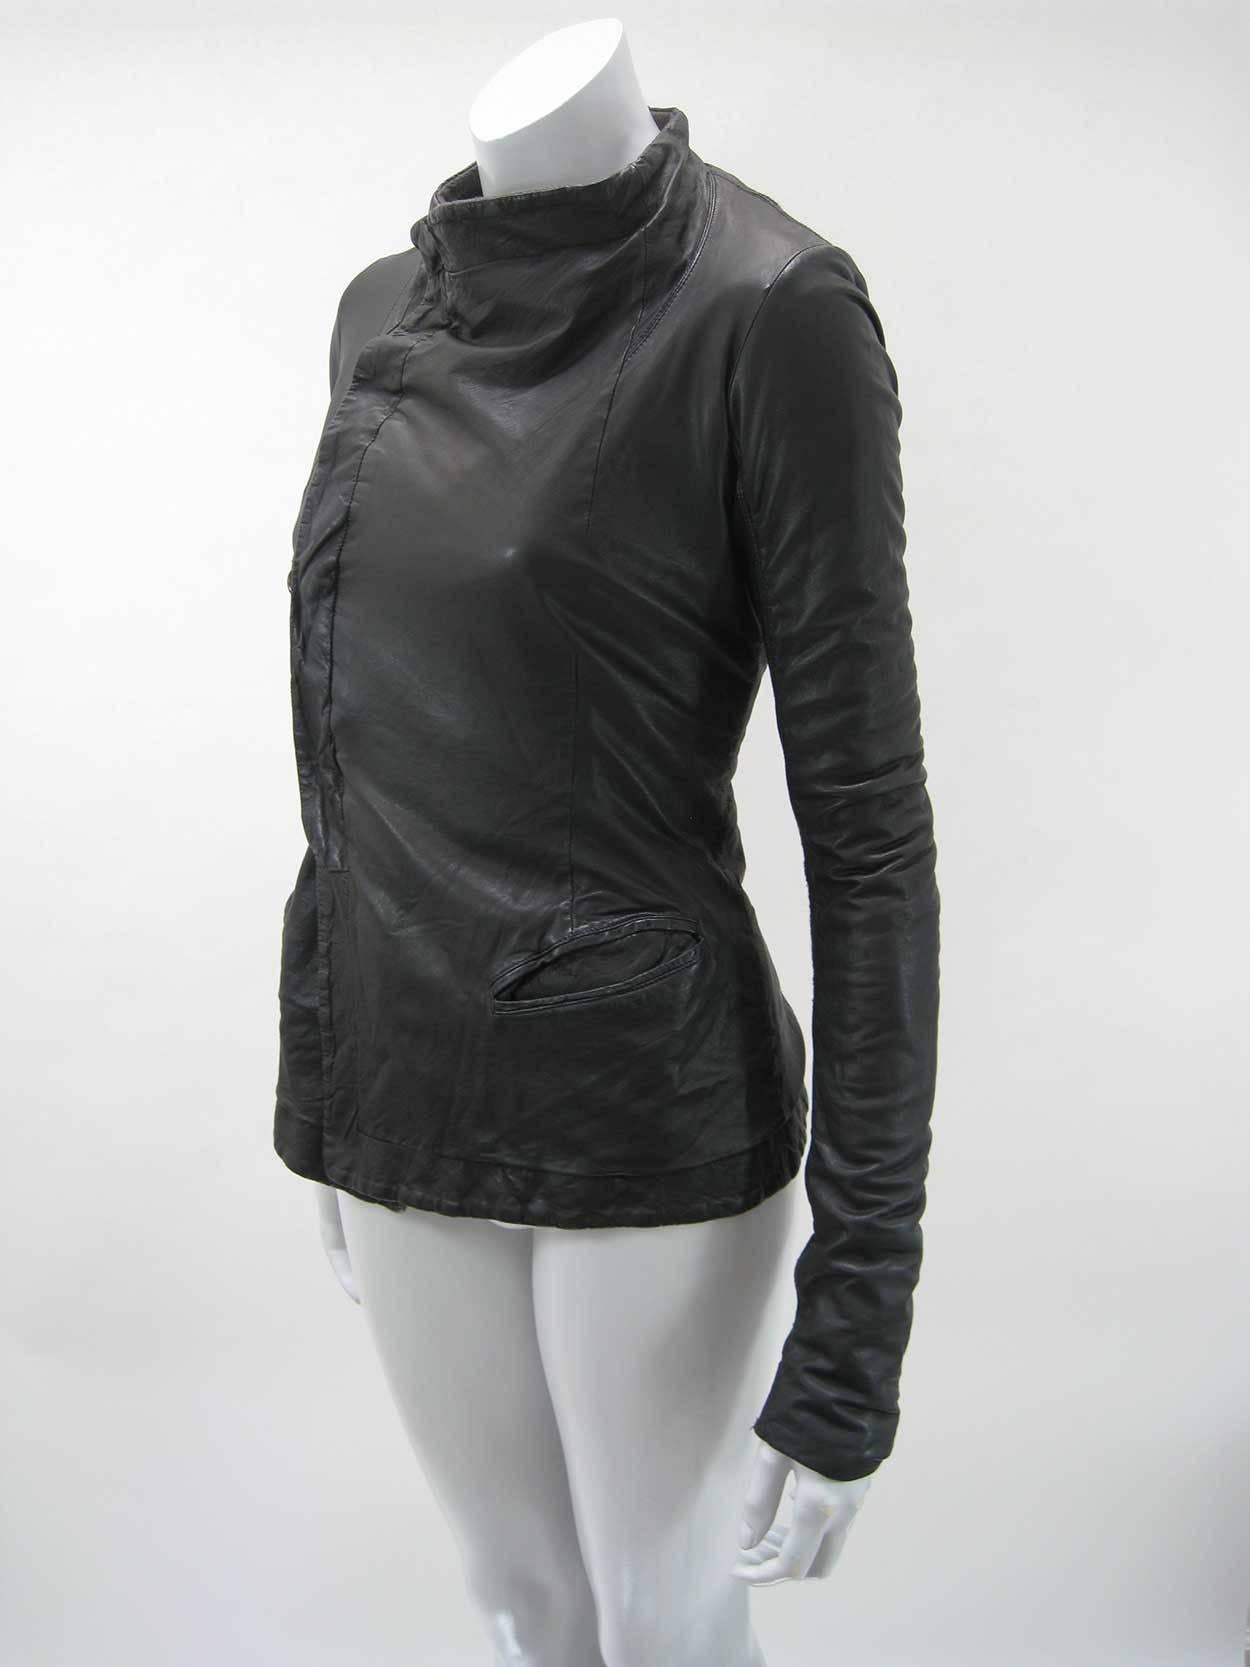 Rick Owens fitted leather jacket.

Very soft lambskin leather with intentional wrinkled/distressed look.

Hidden button closure.

Body is lined in fleece-like fabric.

Arms feature ribbed knit arm-length panels.

Front pockets and inside